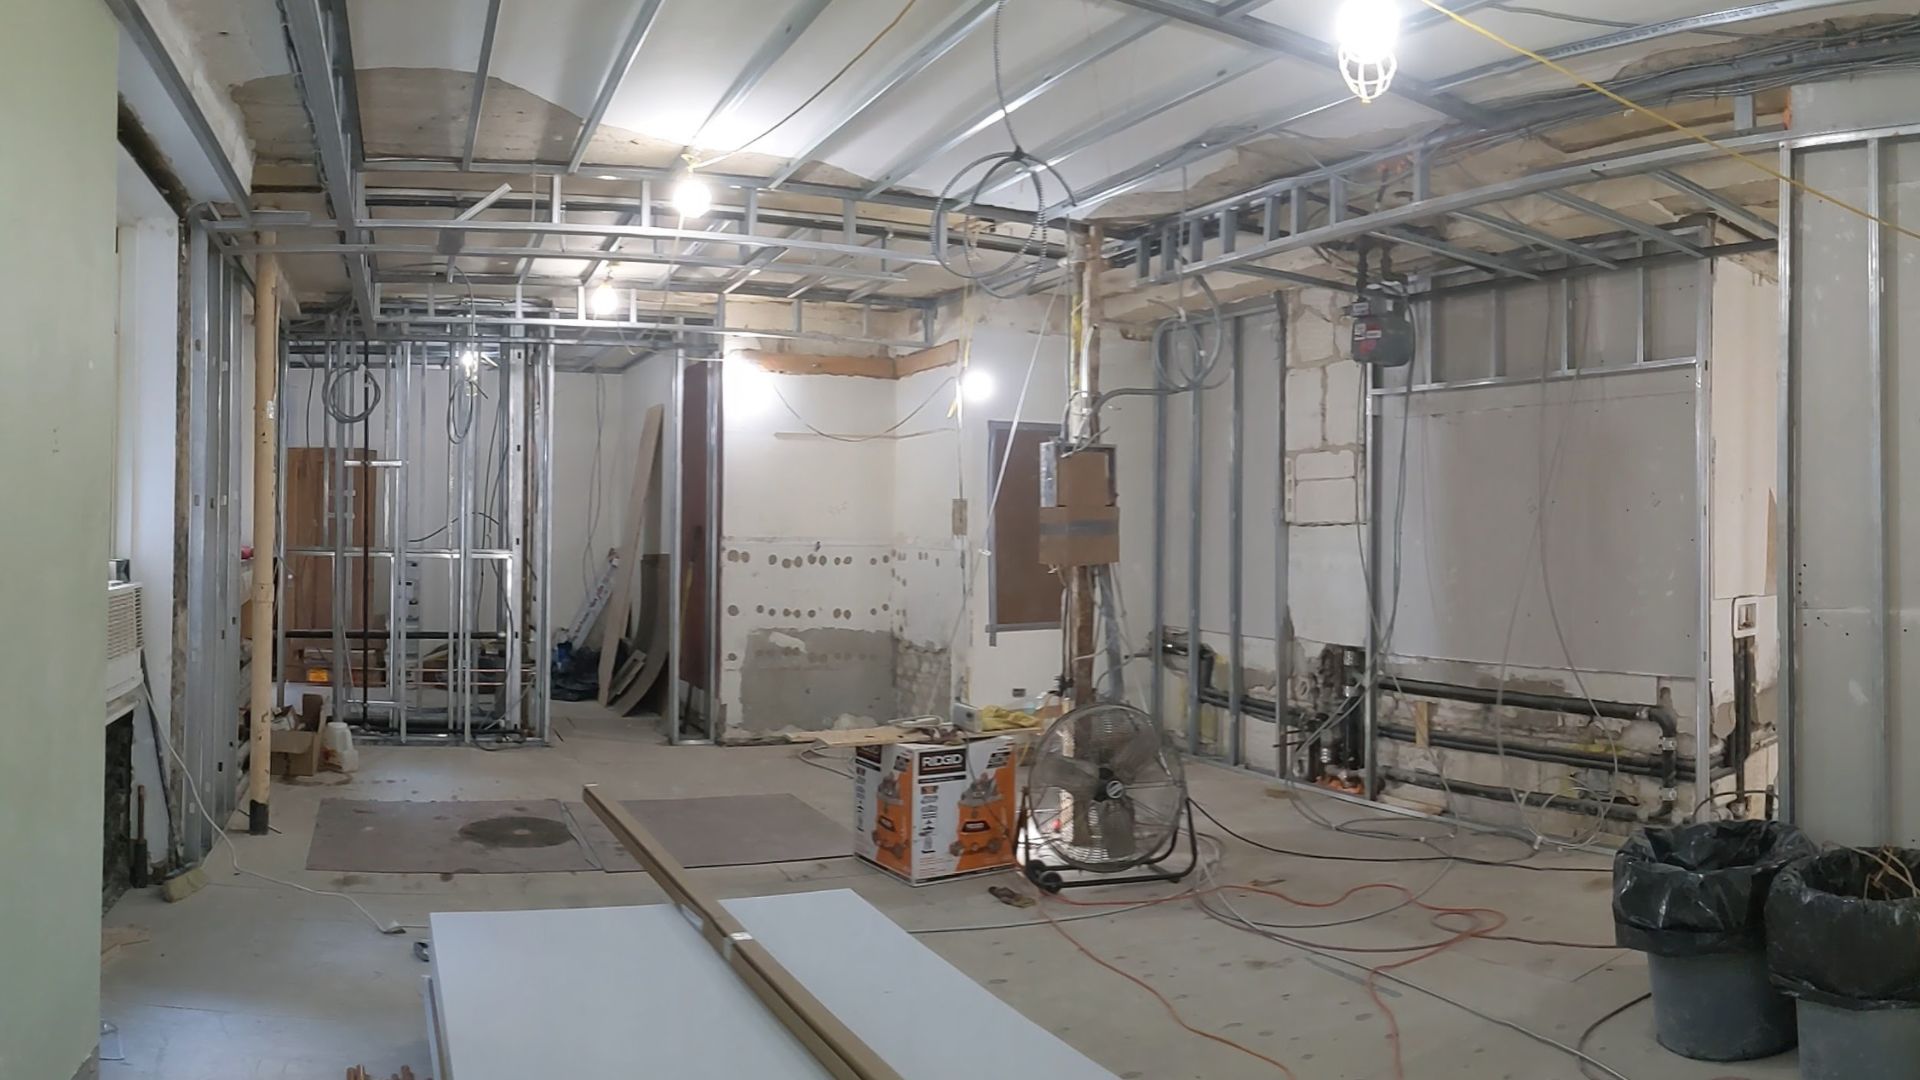 An interior space under construction with exposed metal studs, pipes, and electrical wires.